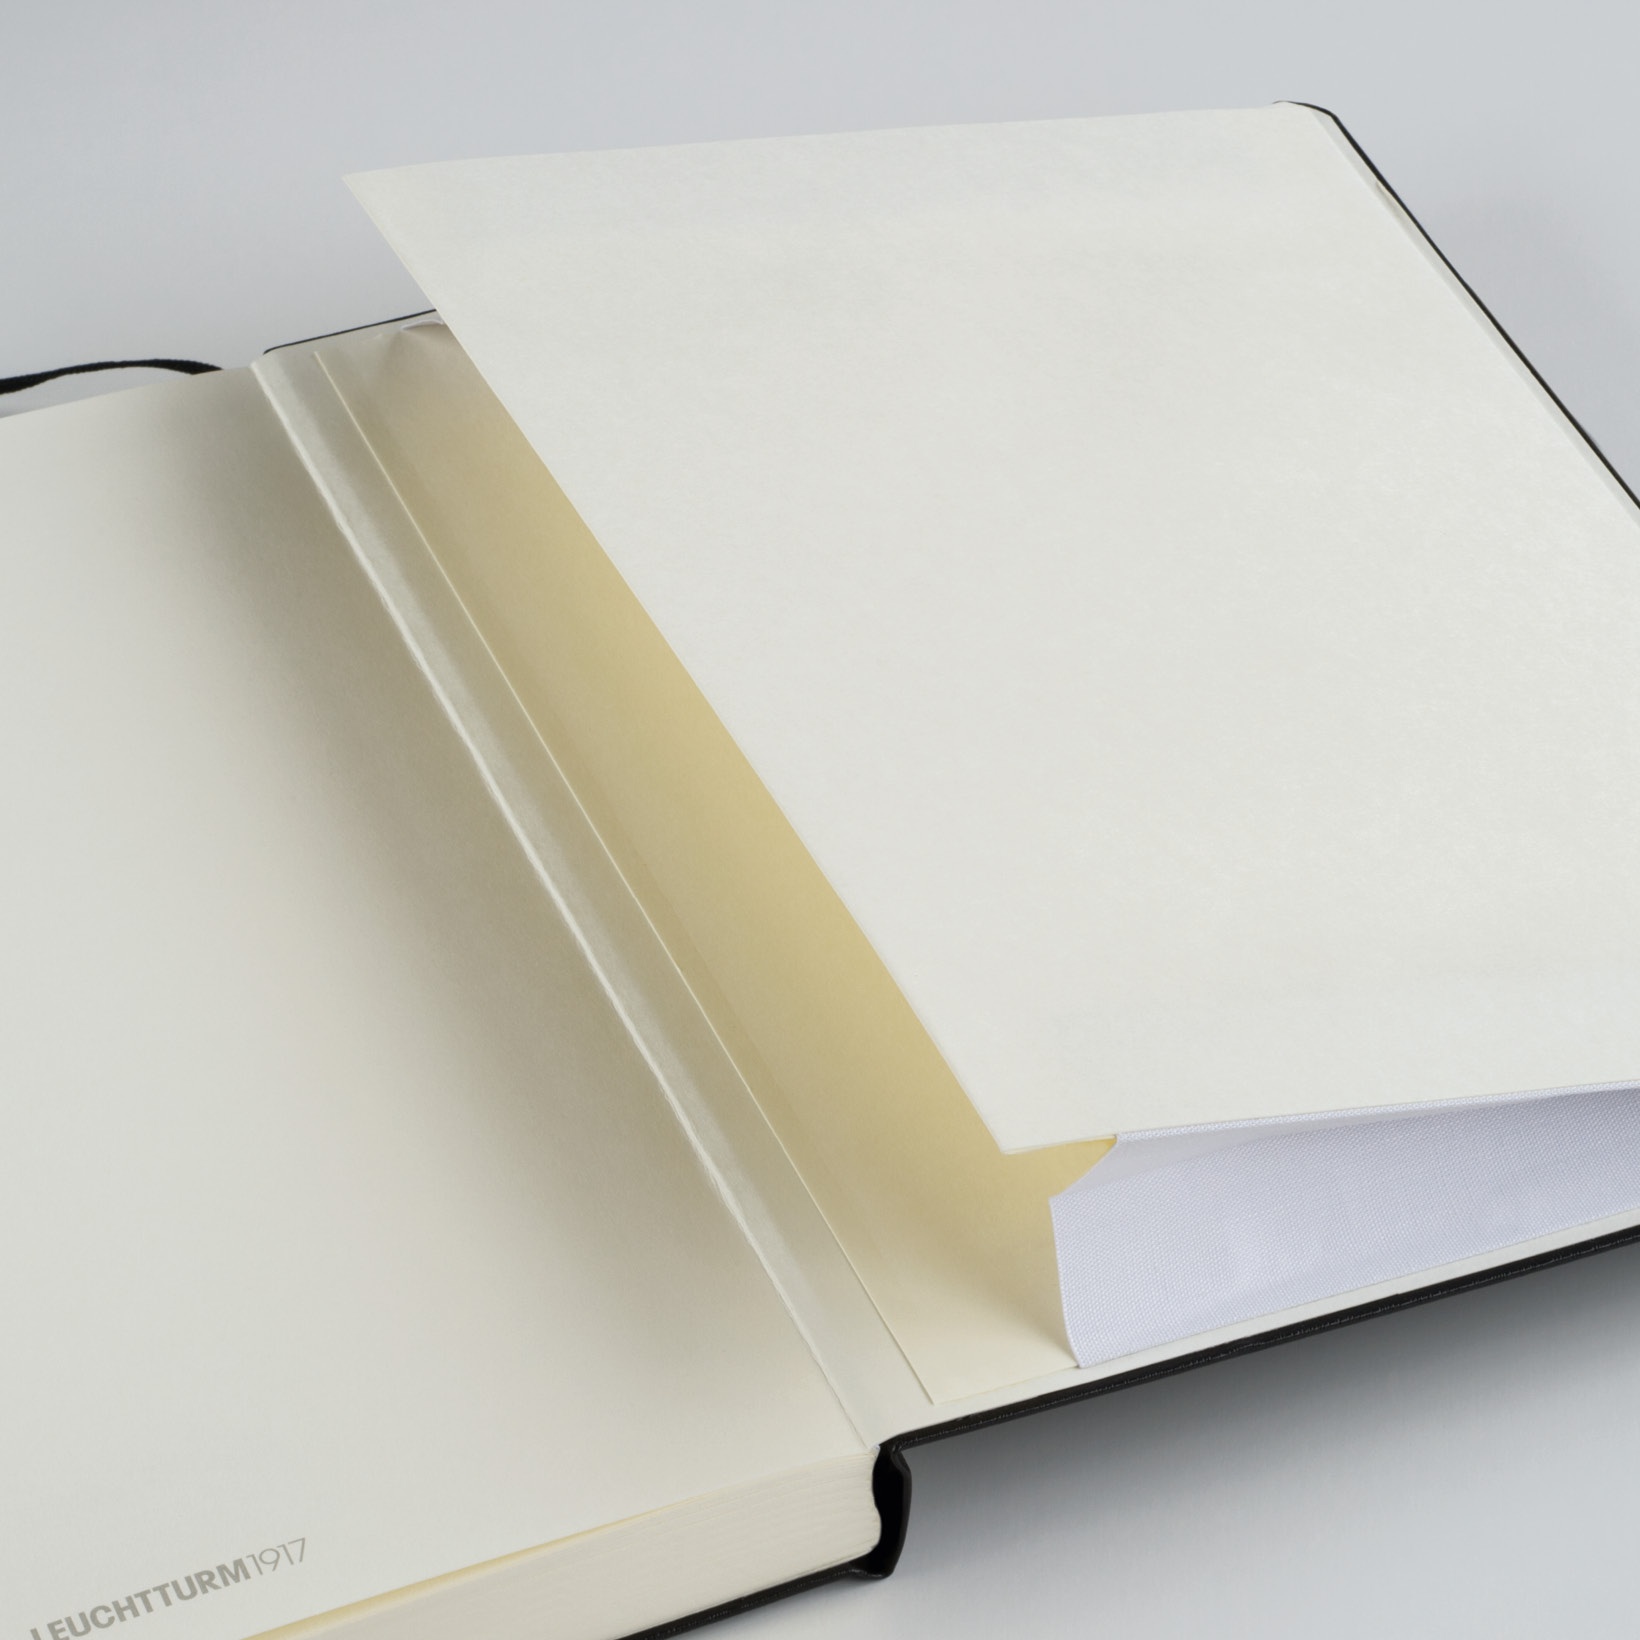 Notebook Medium (A5), Hardcover, 249 numbered pages – LEUCHTTURM1917